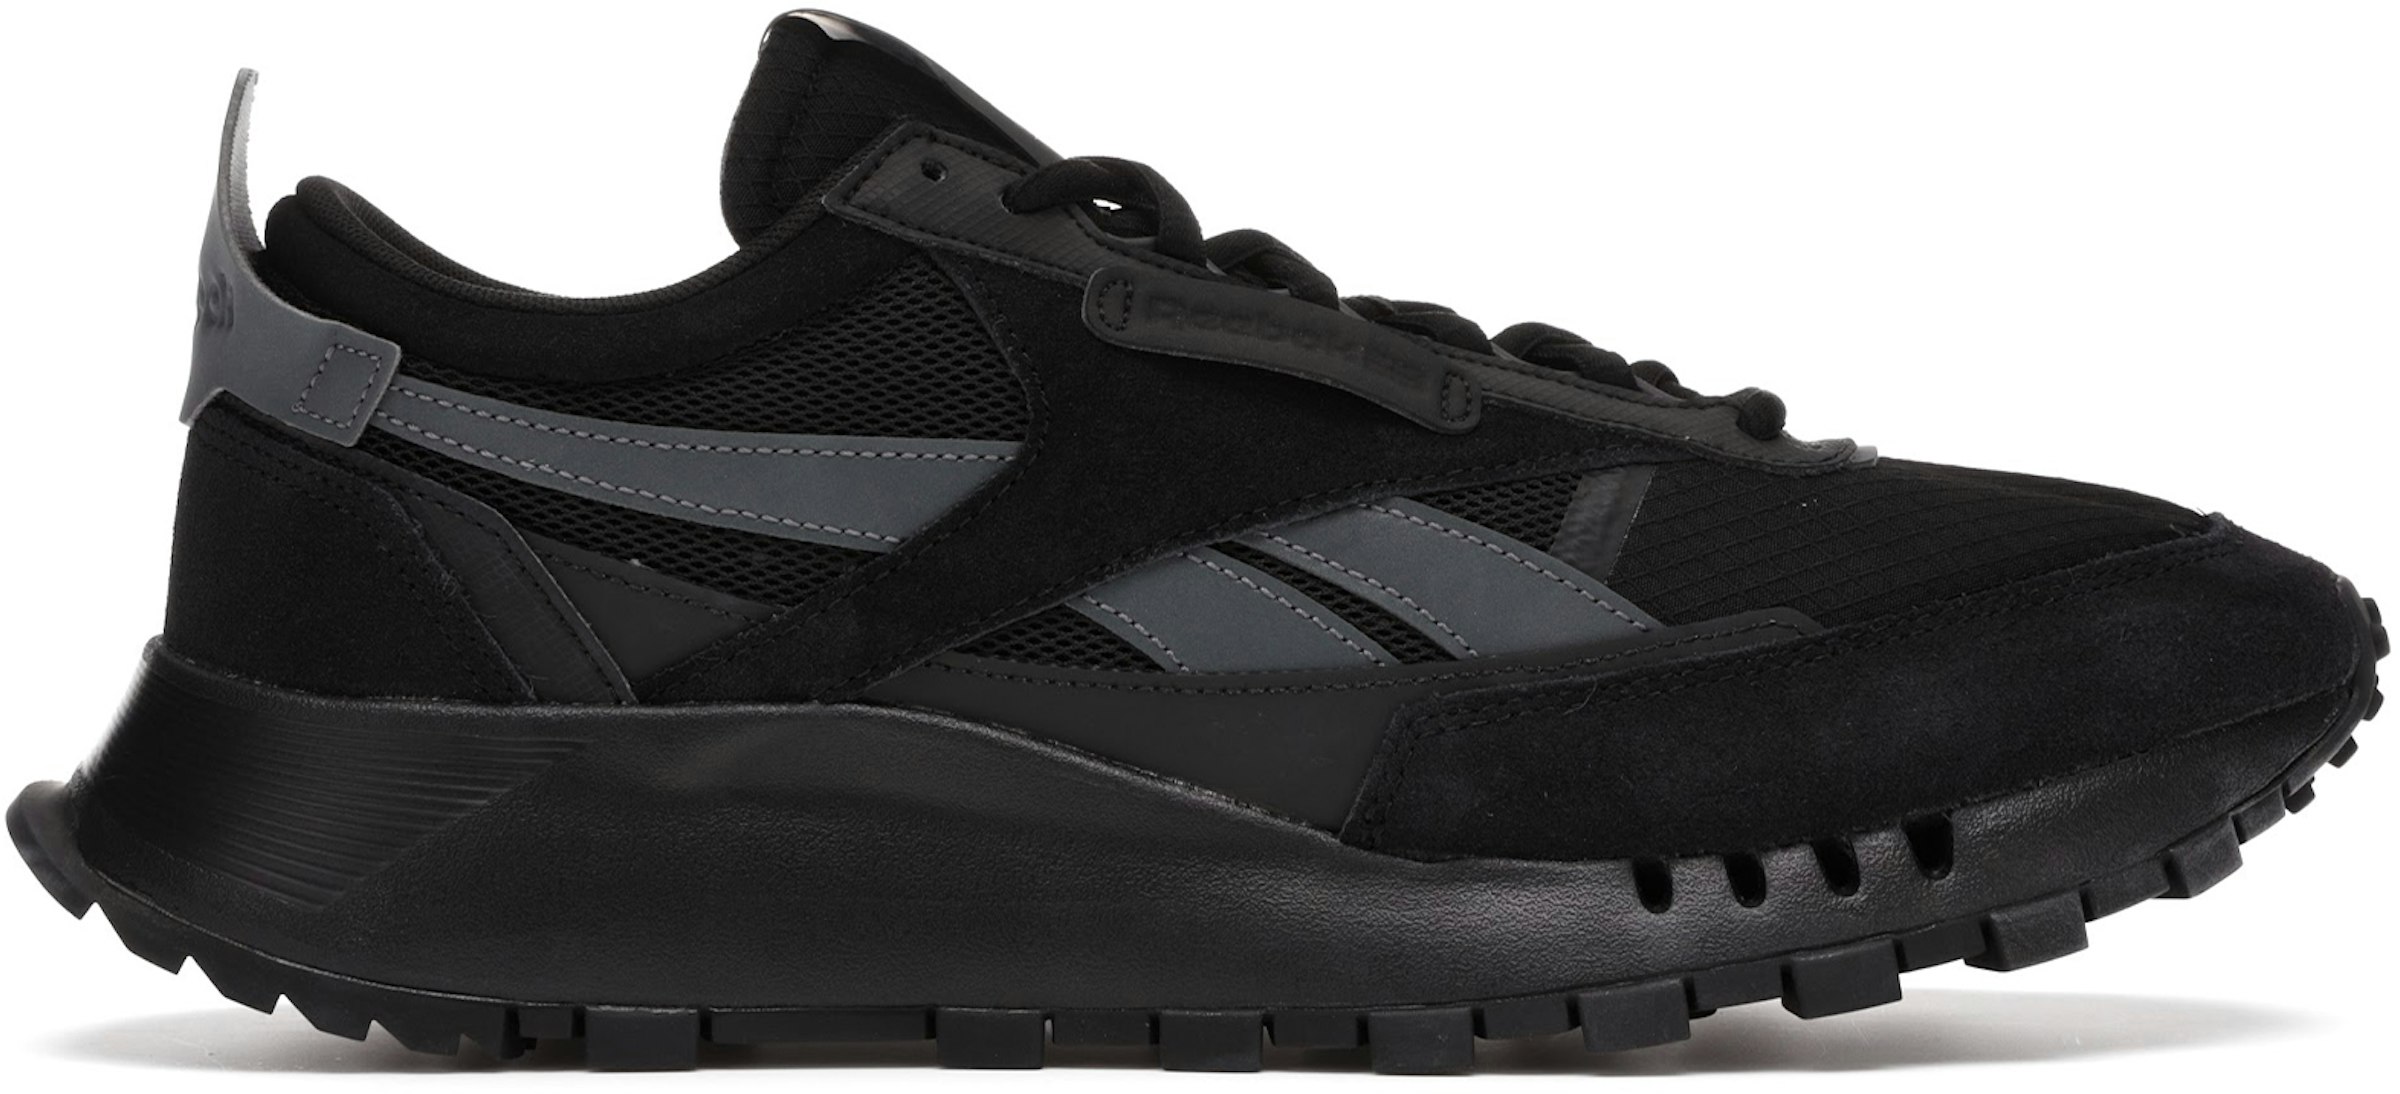 champán Subproducto relajarse Reebok Classic Leather Legacy Black Grey Men's - FY7377 - US